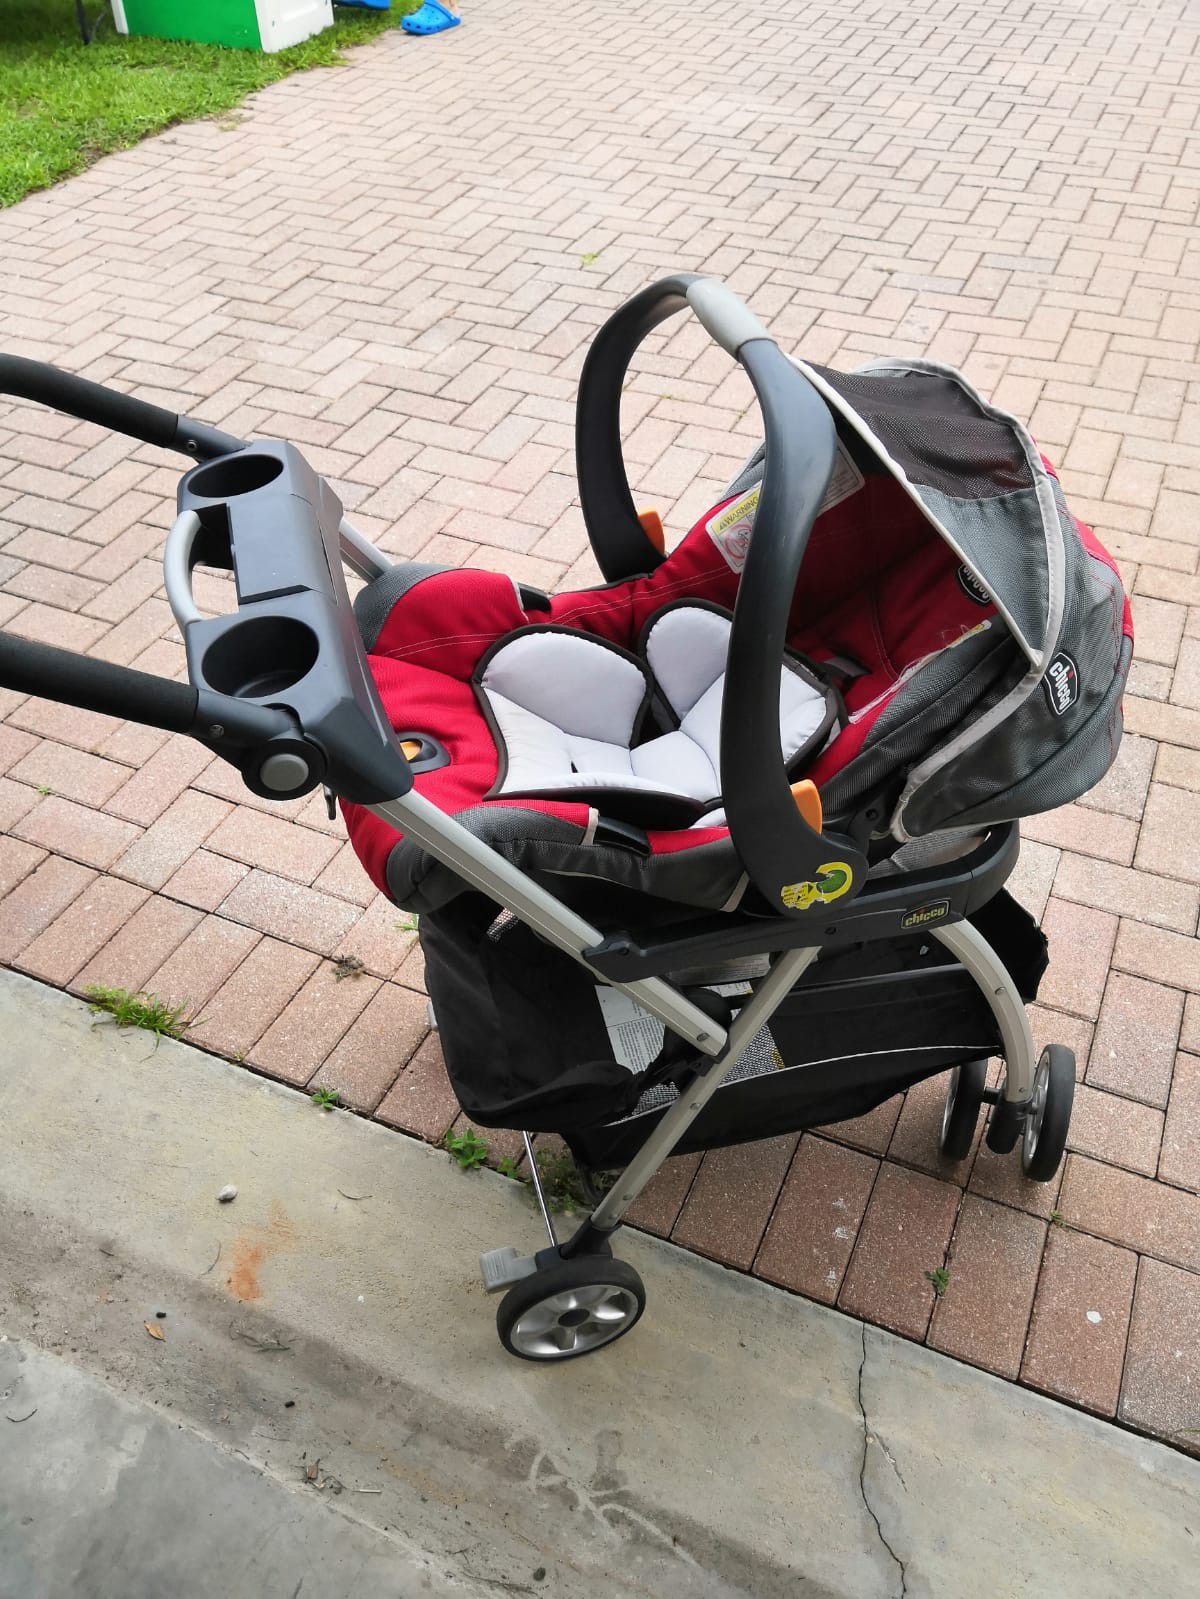 Chicco caddy stroller and base